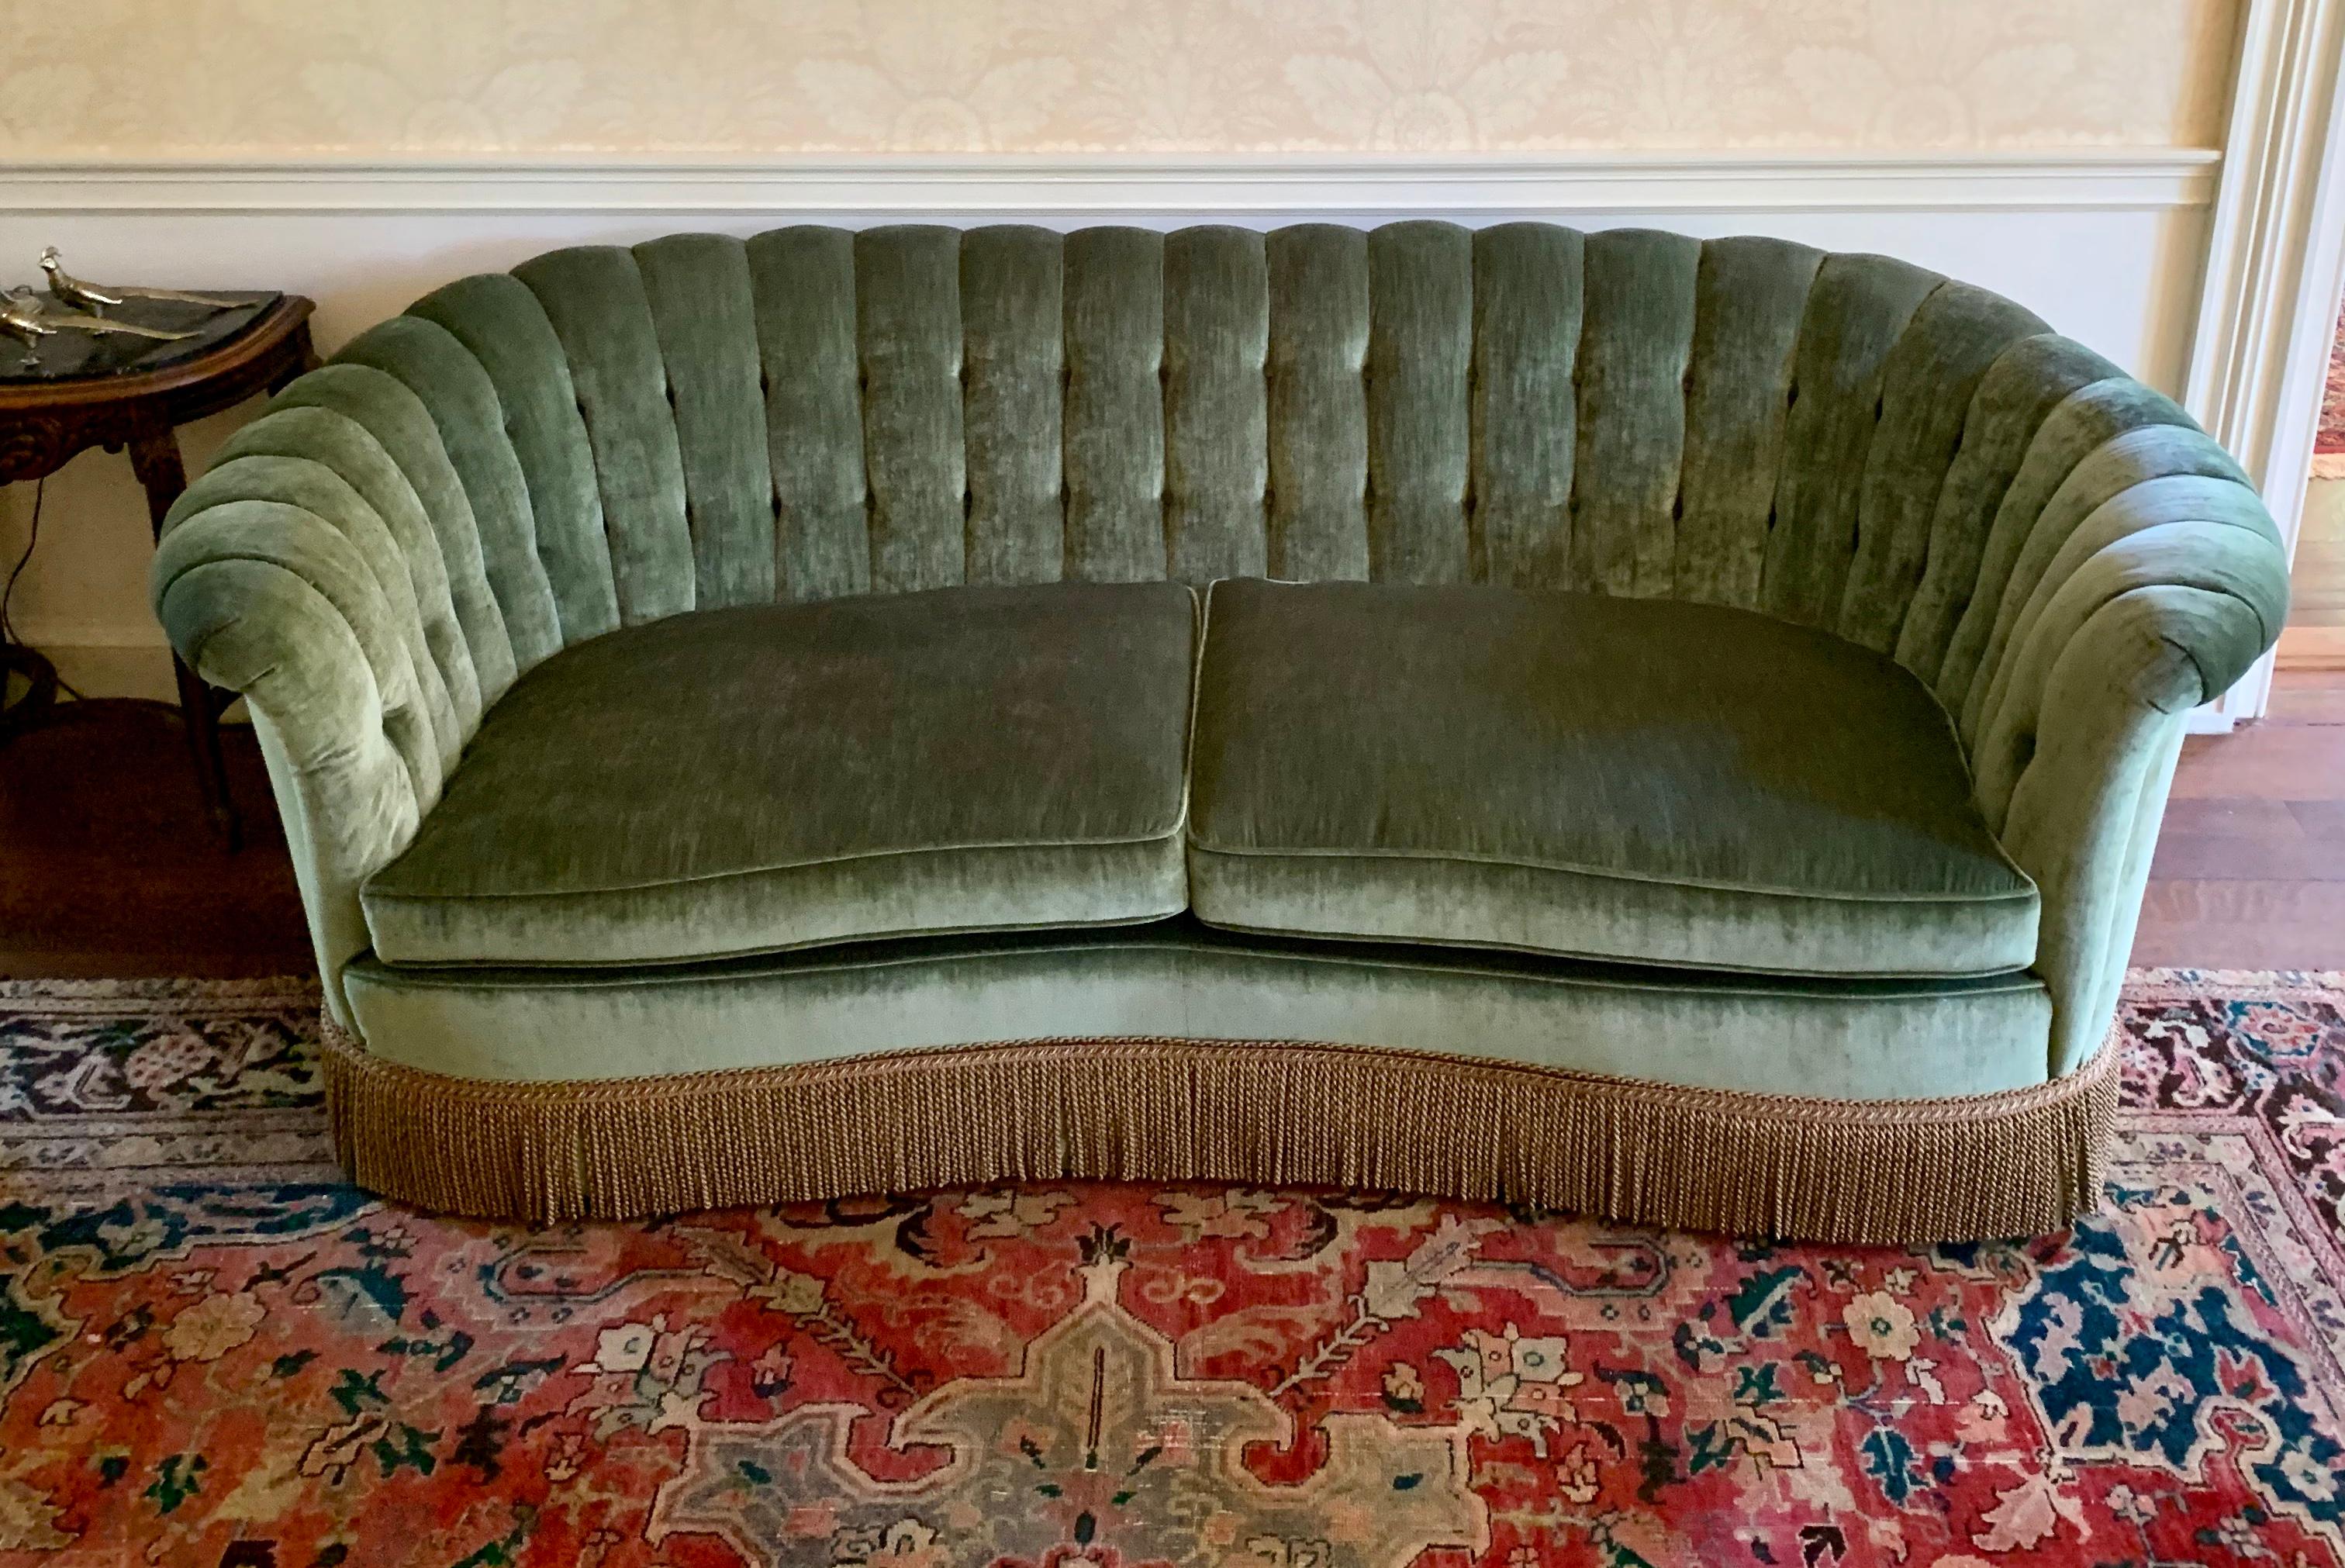 Stunning Art Deco style curved channel back sofa with gorgeous Kravet velvet fabric and tassel fringe. Color is a gorgeous celadon green. Great scale and better lines. Excellent condition and sits beautifully with eight way hand tied construction.